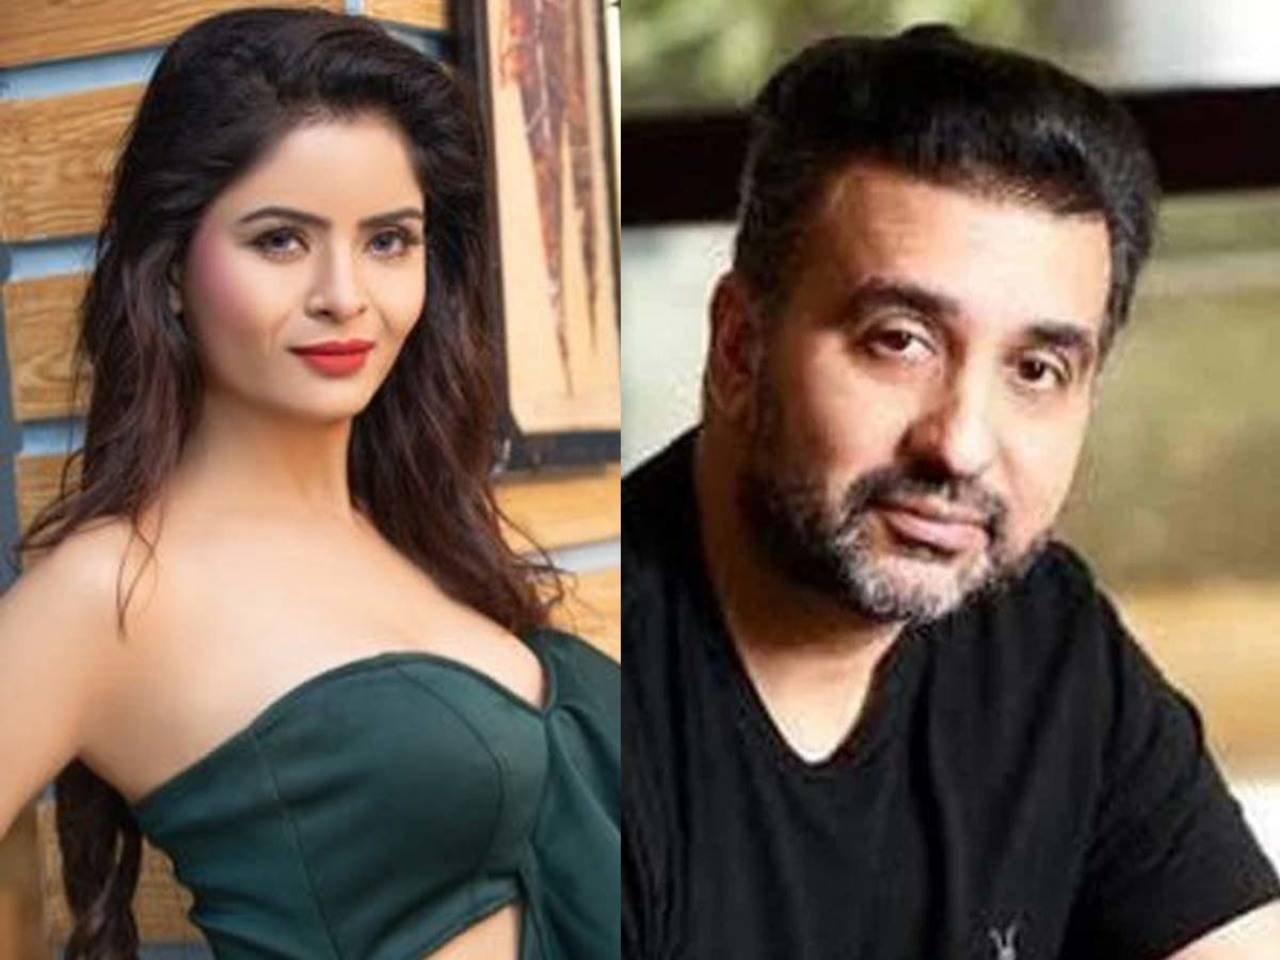 Nude Actress Kajol - Gehana Vasisth and Rowa Khan face serious allegations in detailed victim  statements from pornography case | Hindi Movie News - Times of India